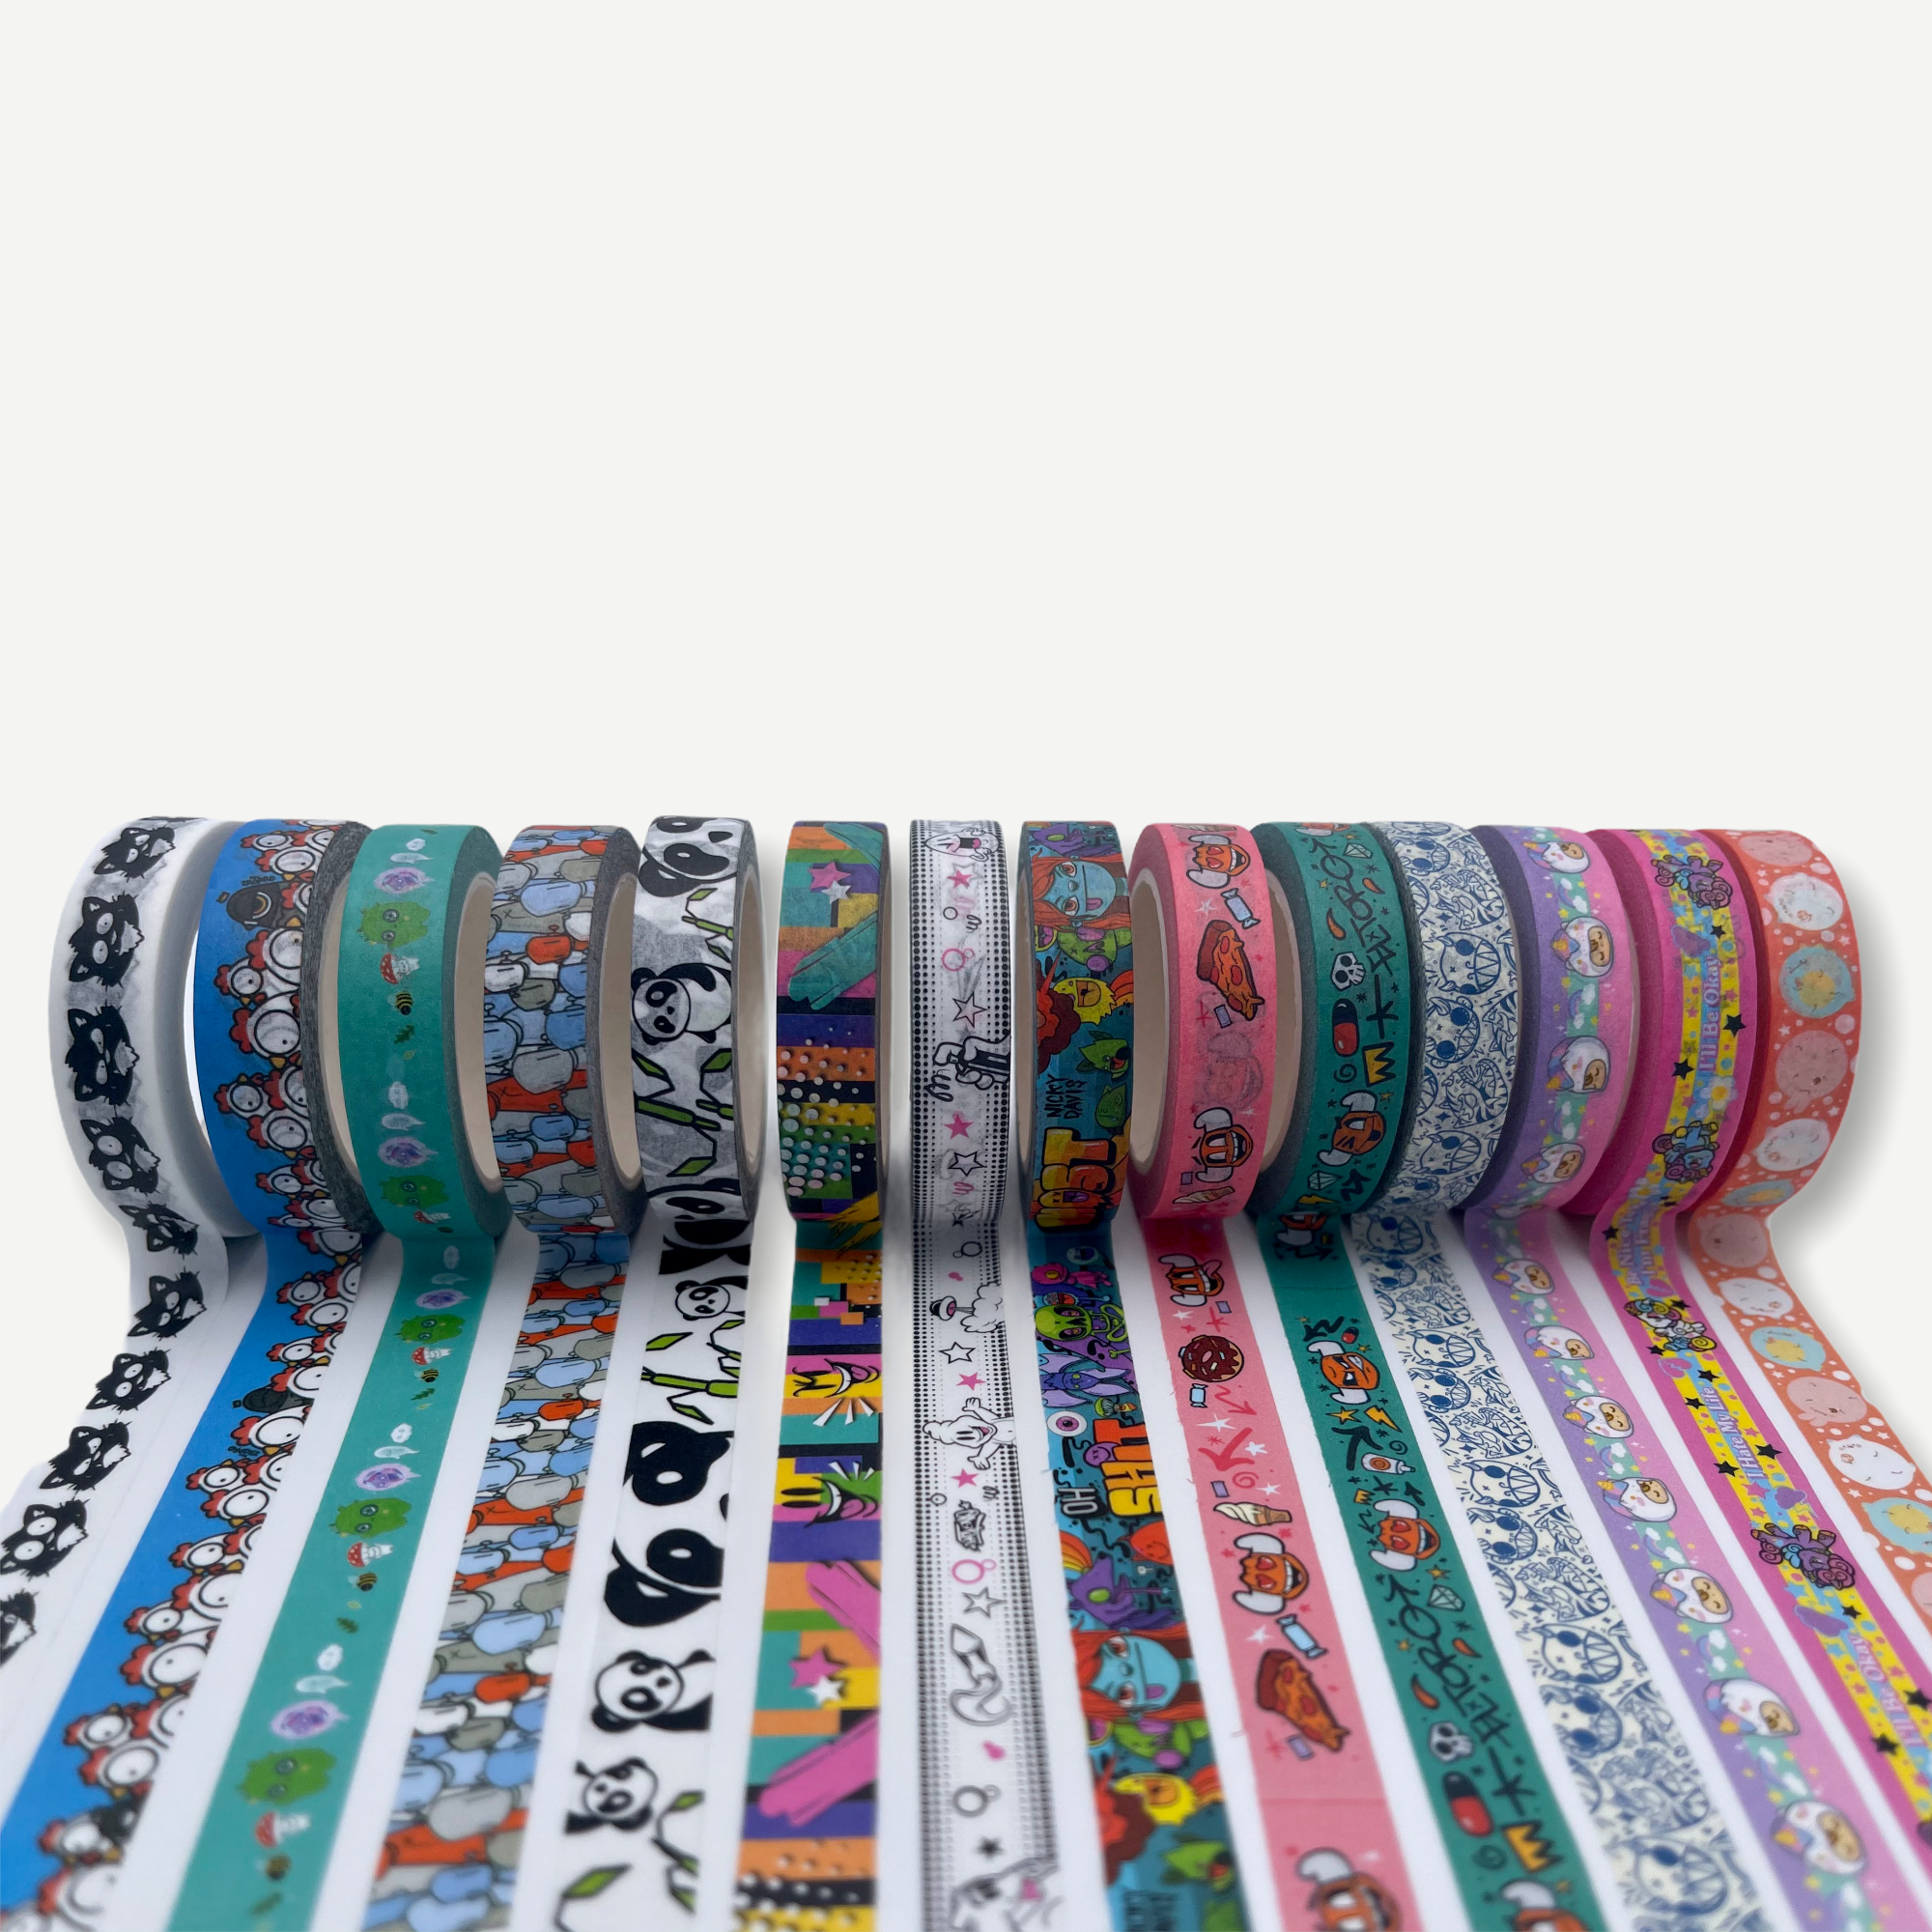 Washi Tape - Artist Series 1: Rolls of decorative tape with various patterns, including a close-up of a border and a panda design.